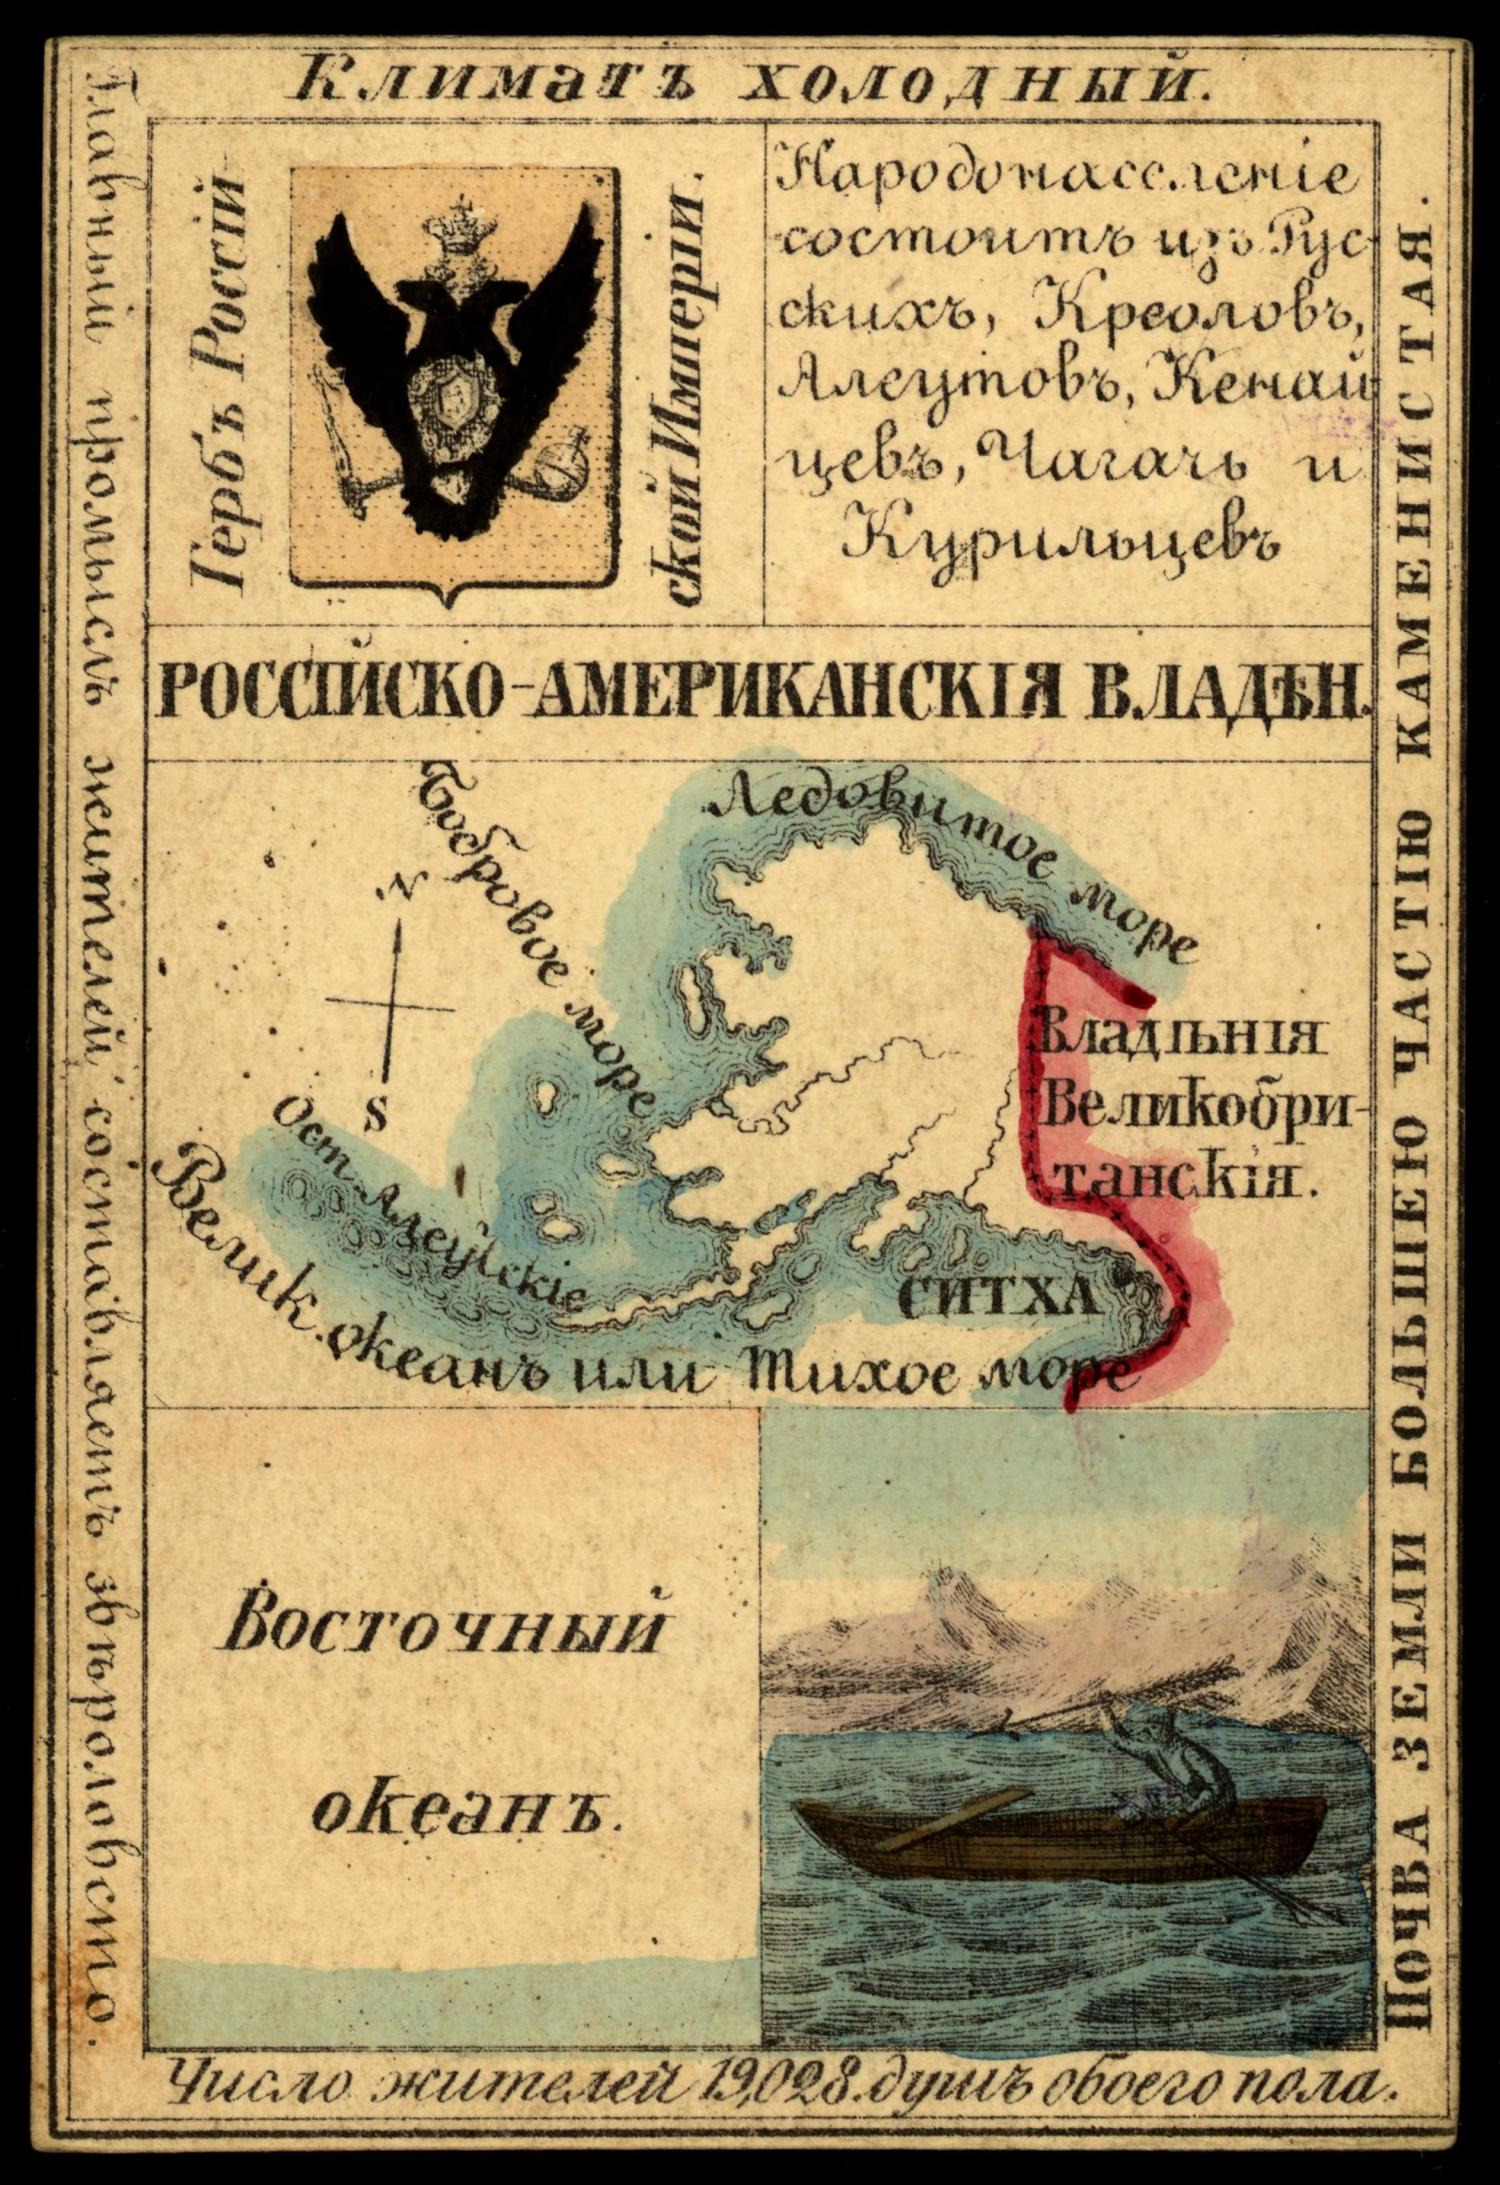 Print of Alaska with drawings, writing in Russian